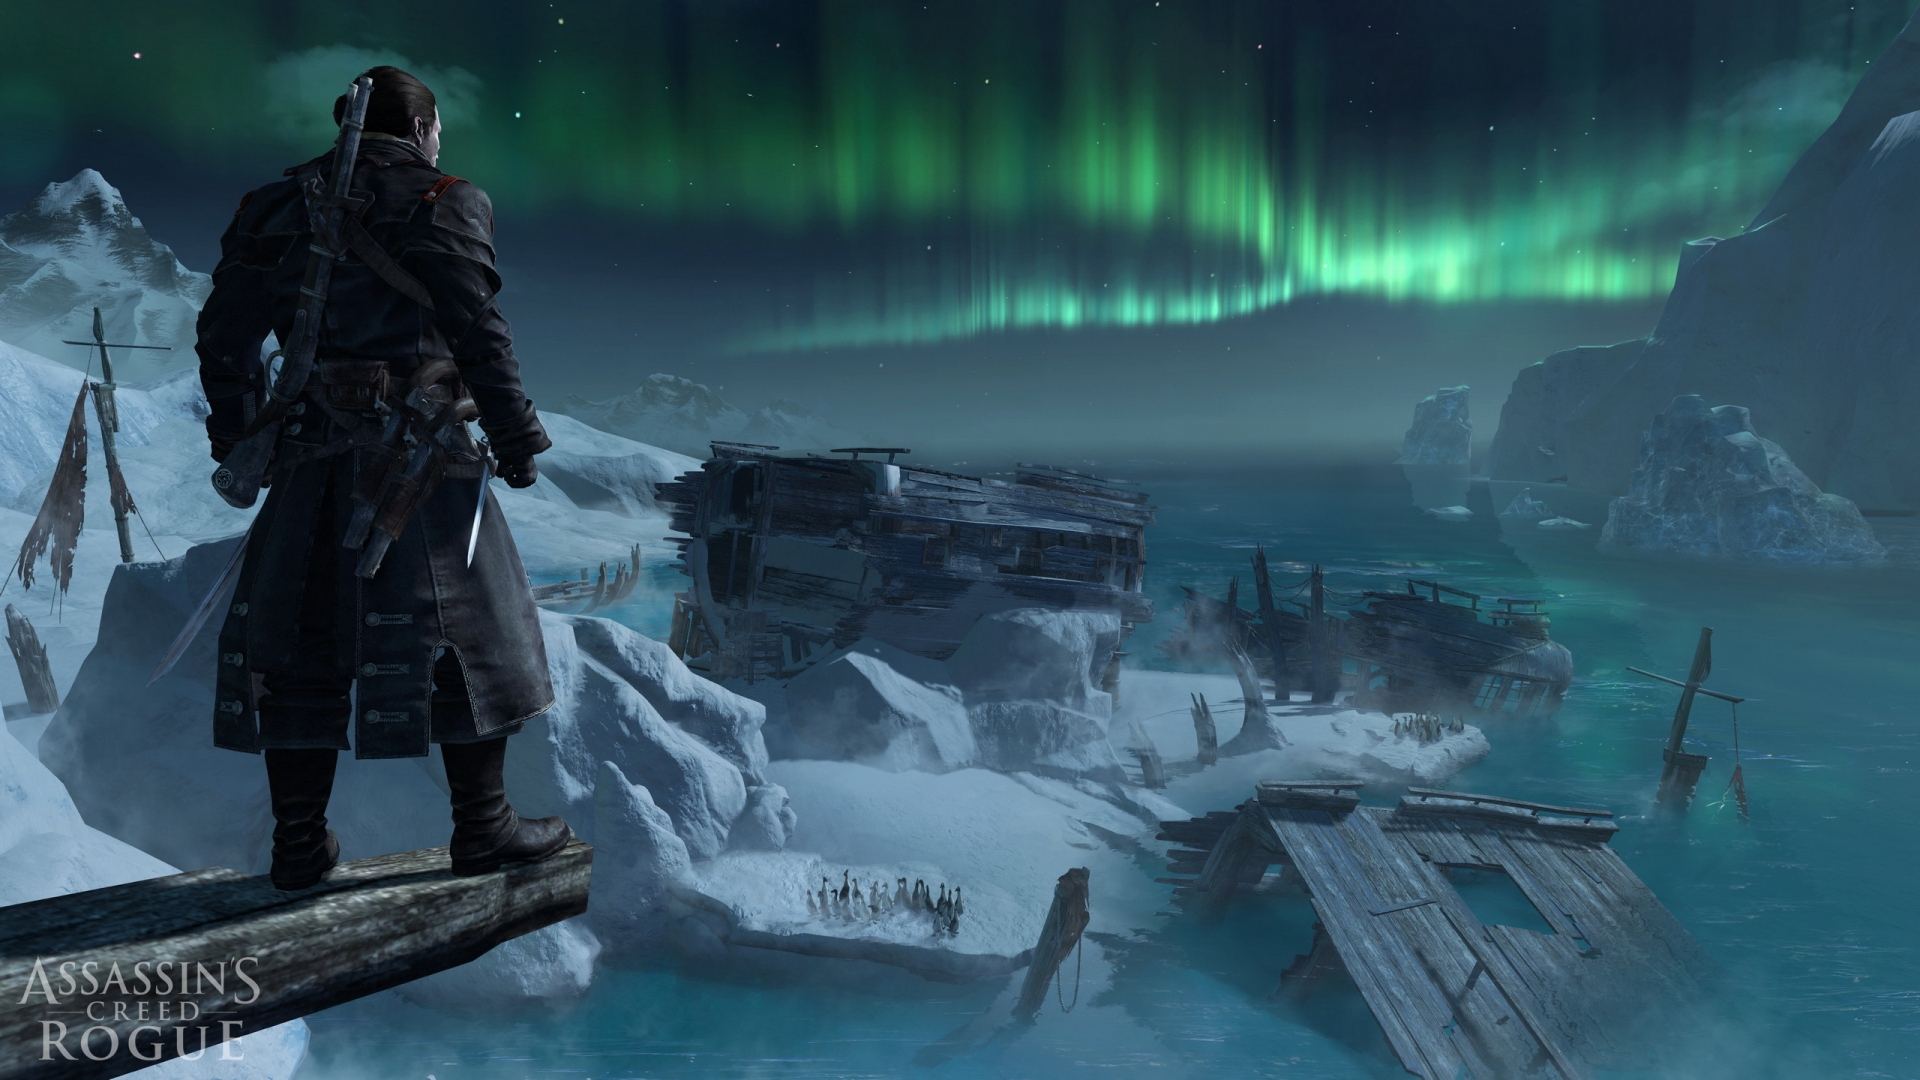 Assassins Creed Rogue Game for 1920 x 1080 HDTV 1080p resolution